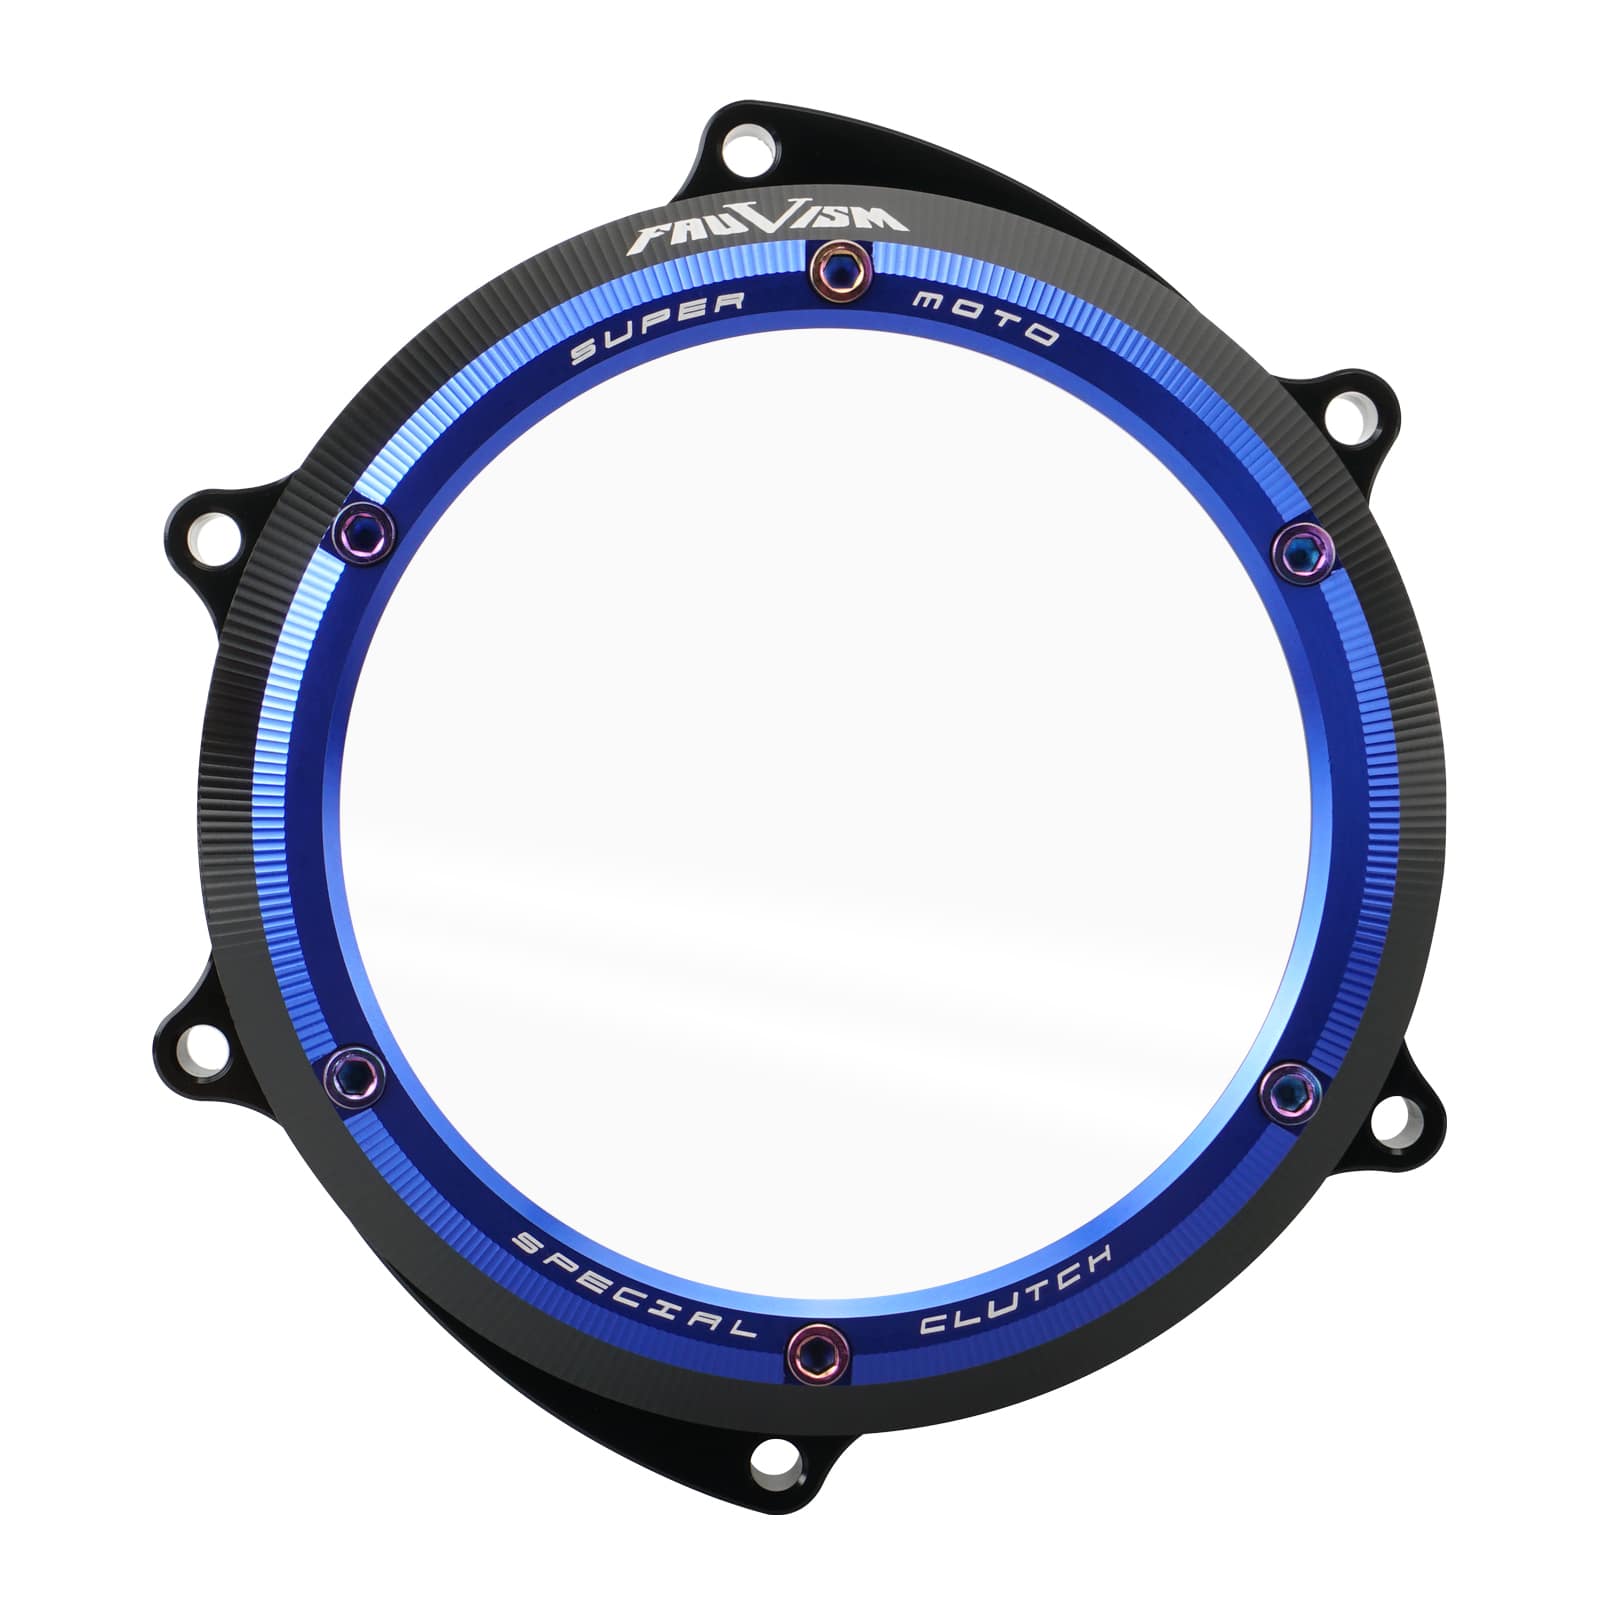 Billet Aluminum Right Clear Clutch Cover For Yamaha YZ250F 2019-2021